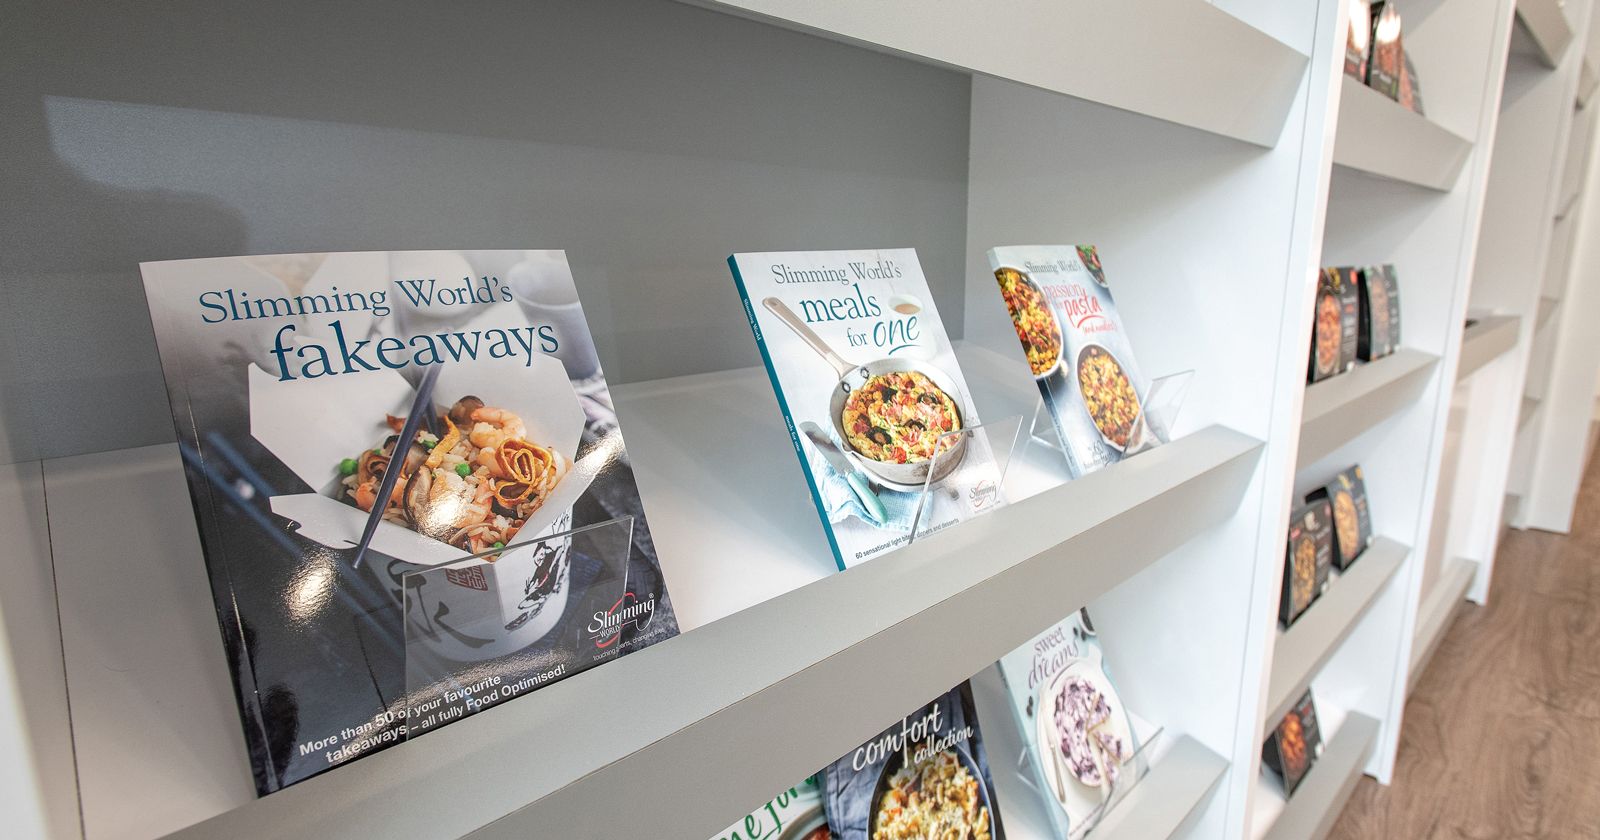 Slimming World shelving test kitchen by APSS